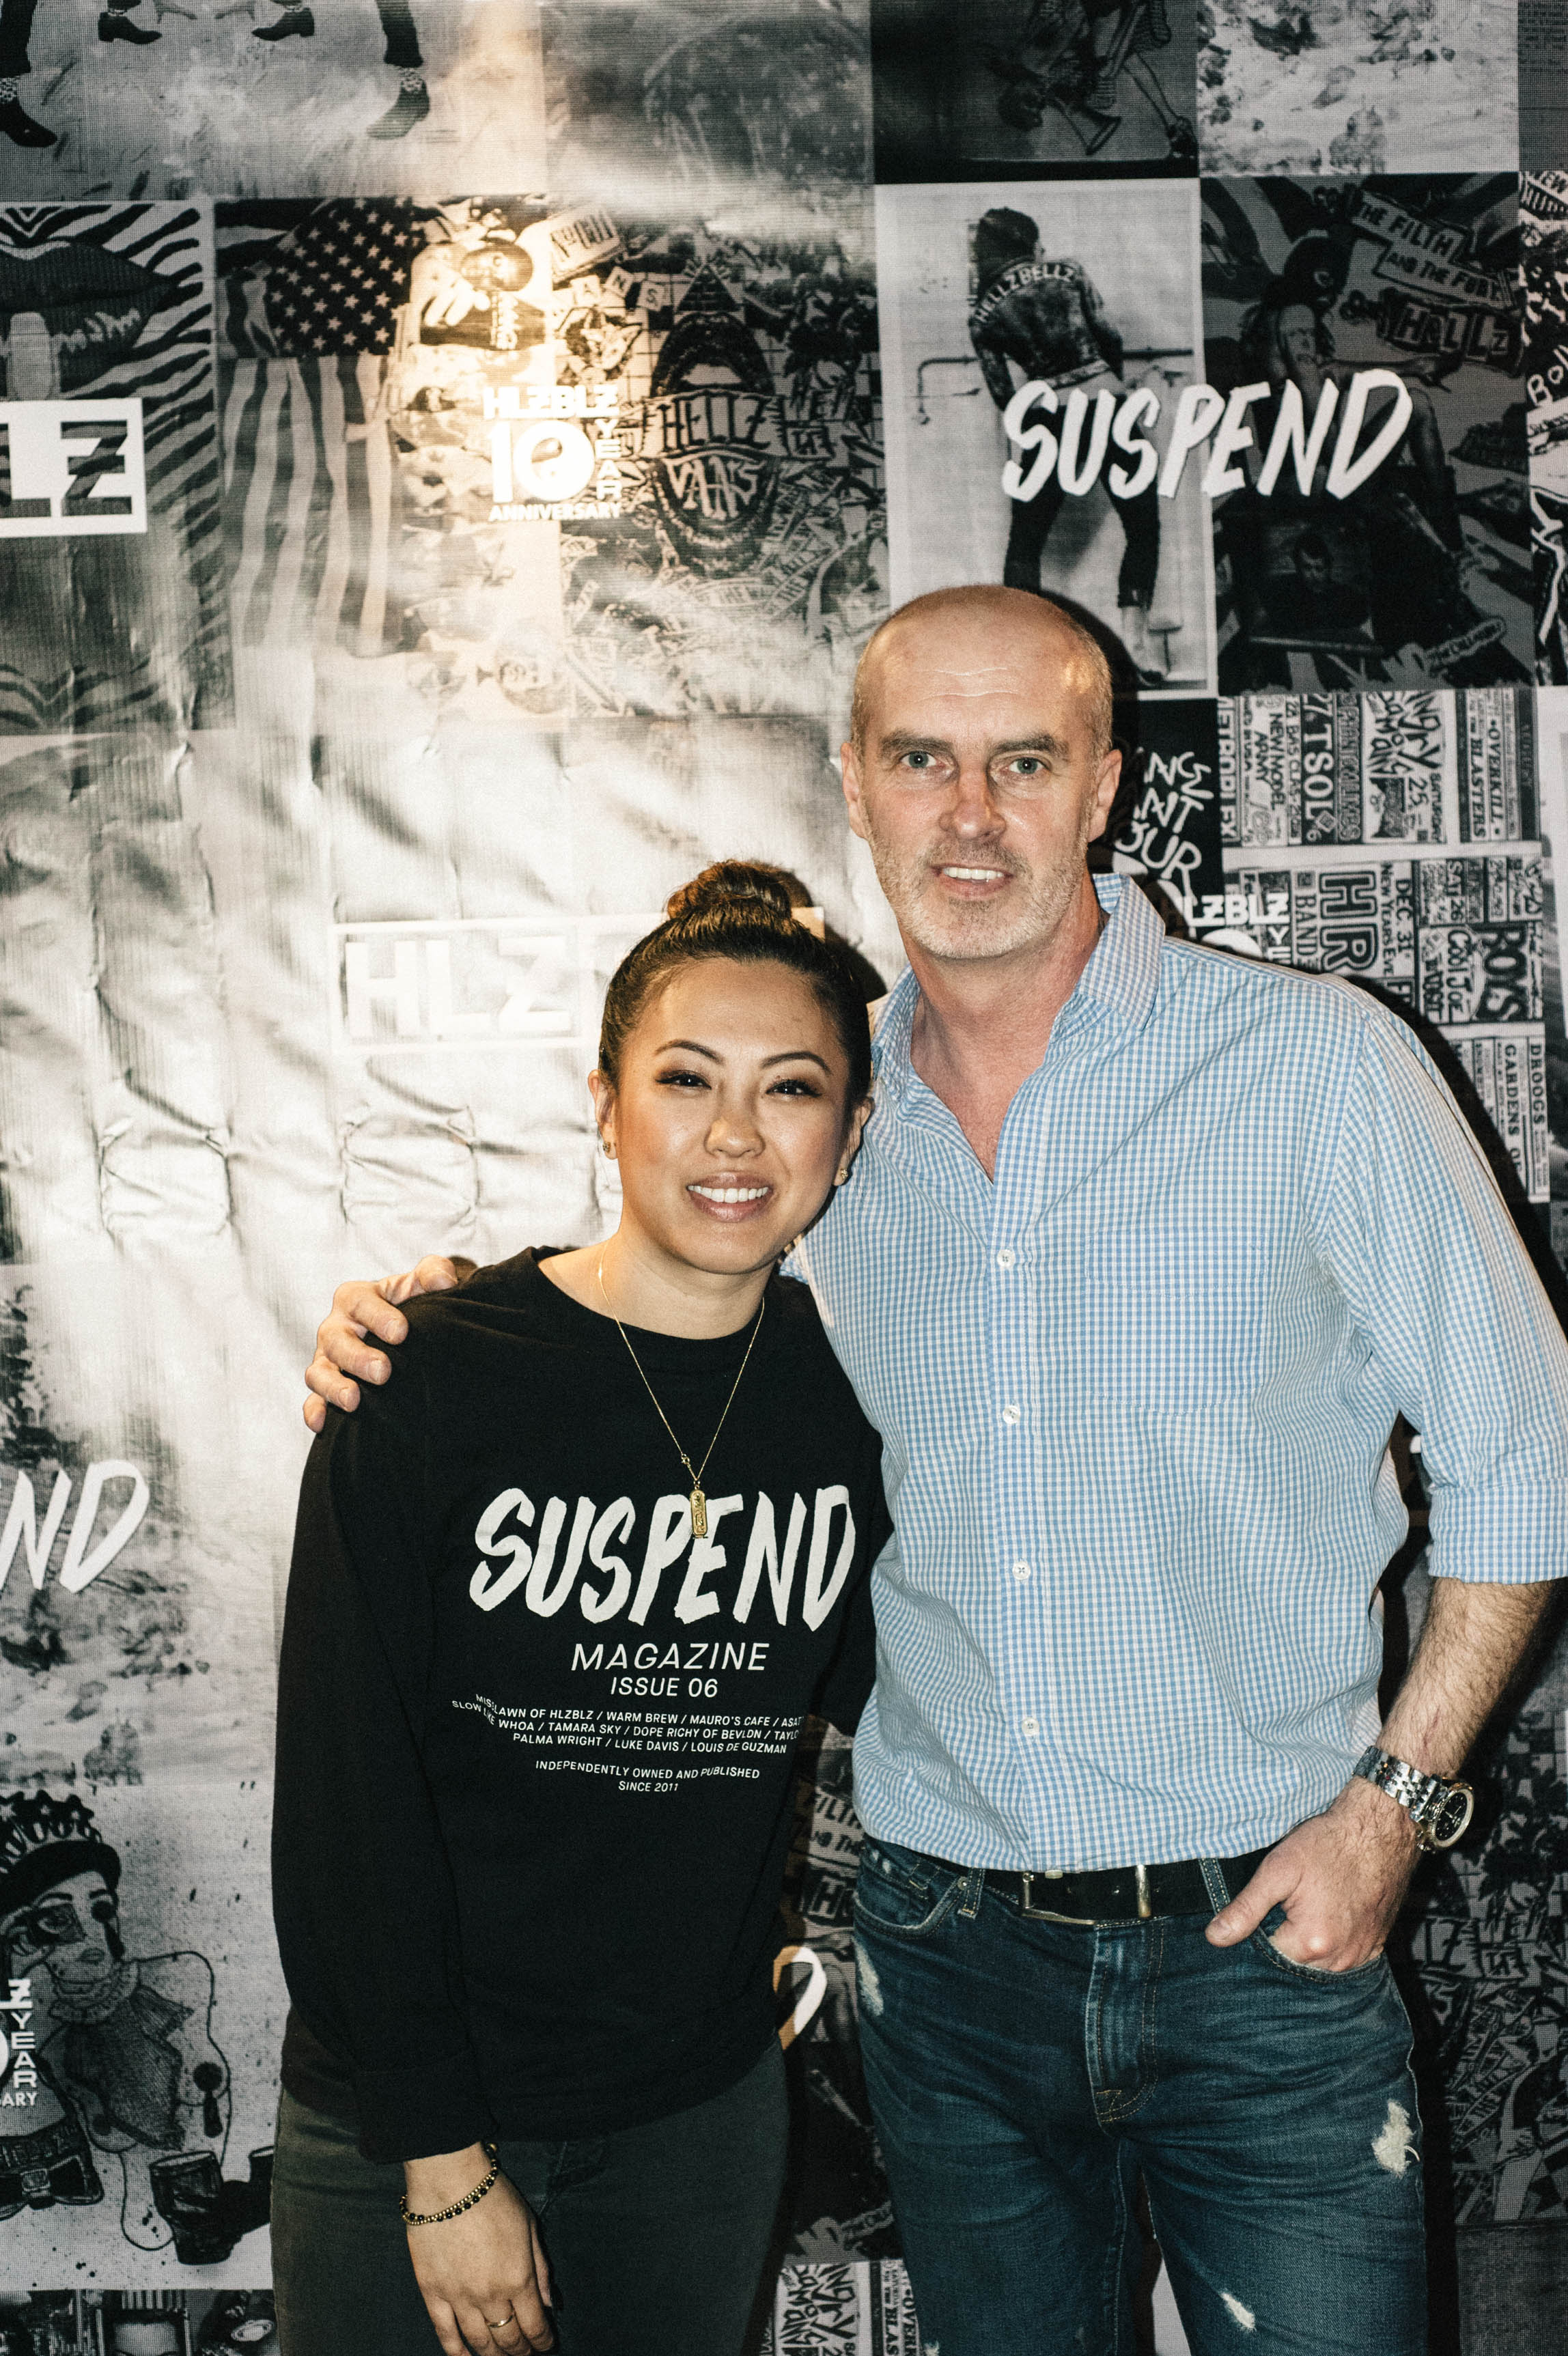  Erik Chol of Globe Theater and EIC Diane Abapo at the ISSUE 06 Launch x HLZBLZ 10Year Anniversary (Feb 11) at Globe Theater. / Photo: © Jordan Abapo for SUSPEND Magazine 